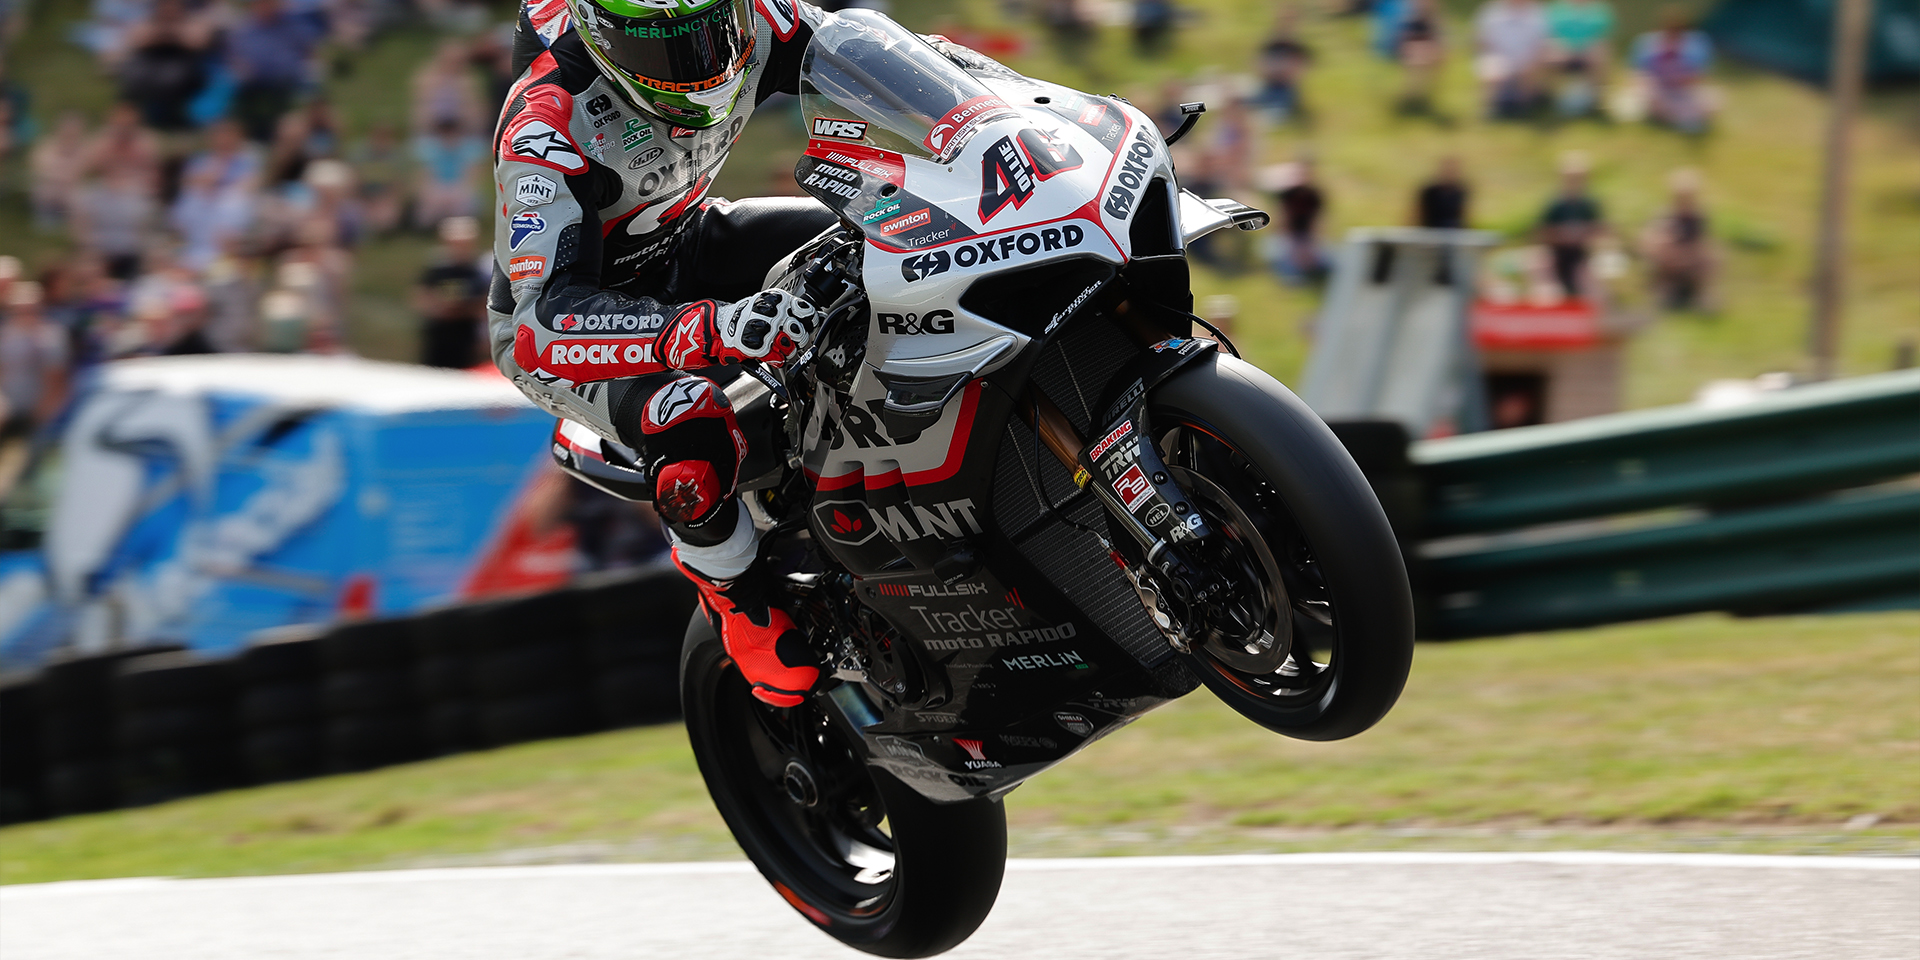 Two podiums and a strong points haul for Tommy Bridewell at Cadwell Park.